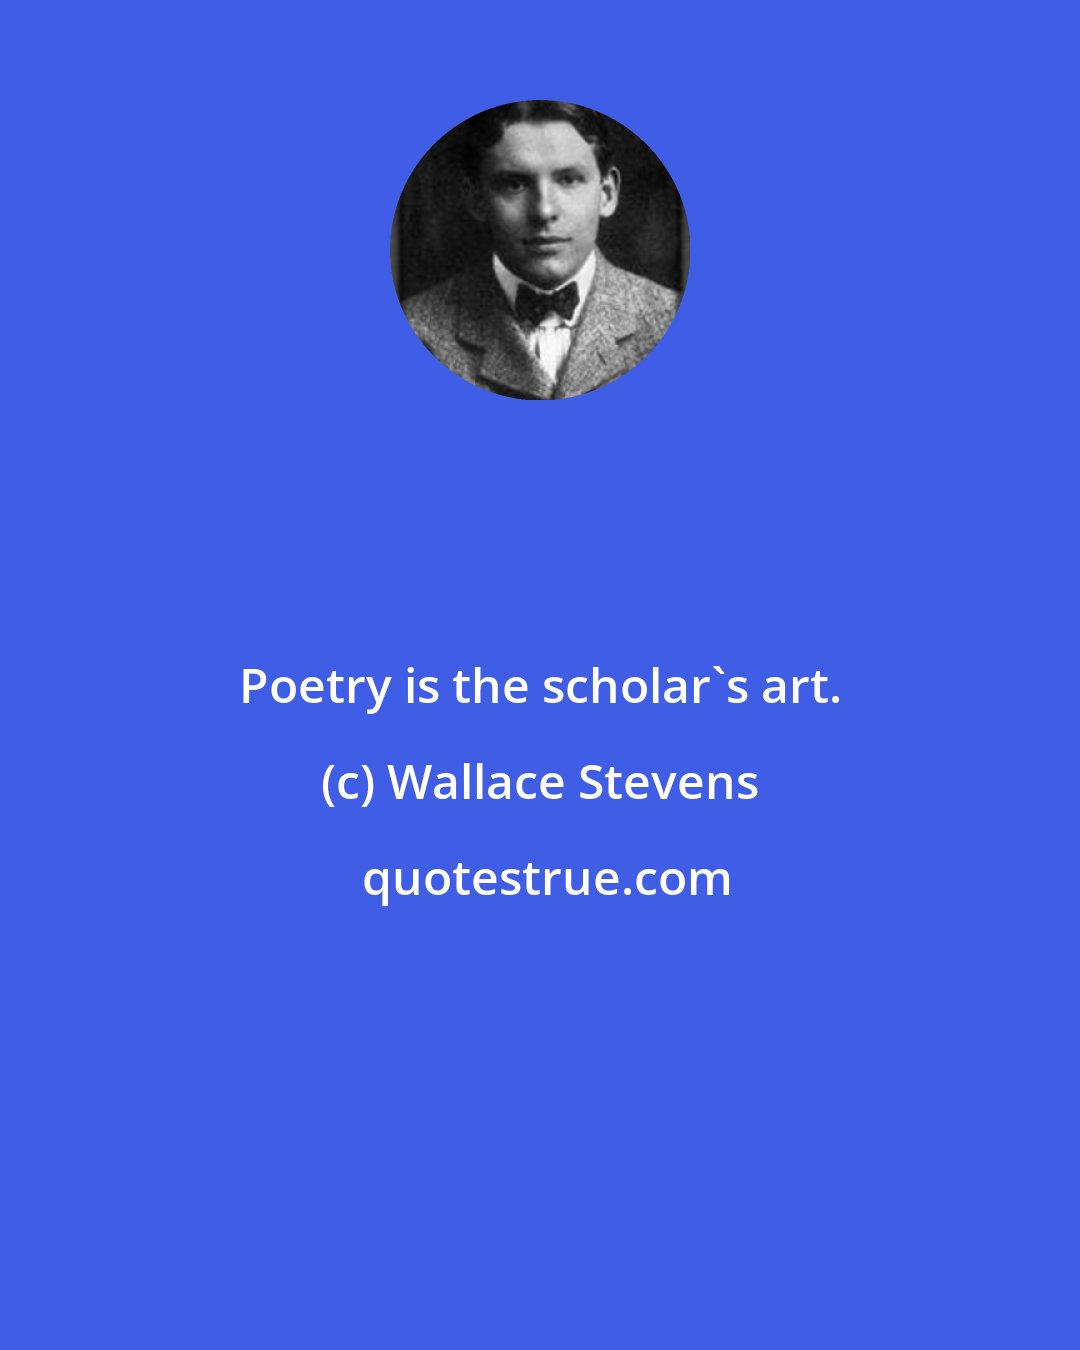 Wallace Stevens: Poetry is the scholar's art.